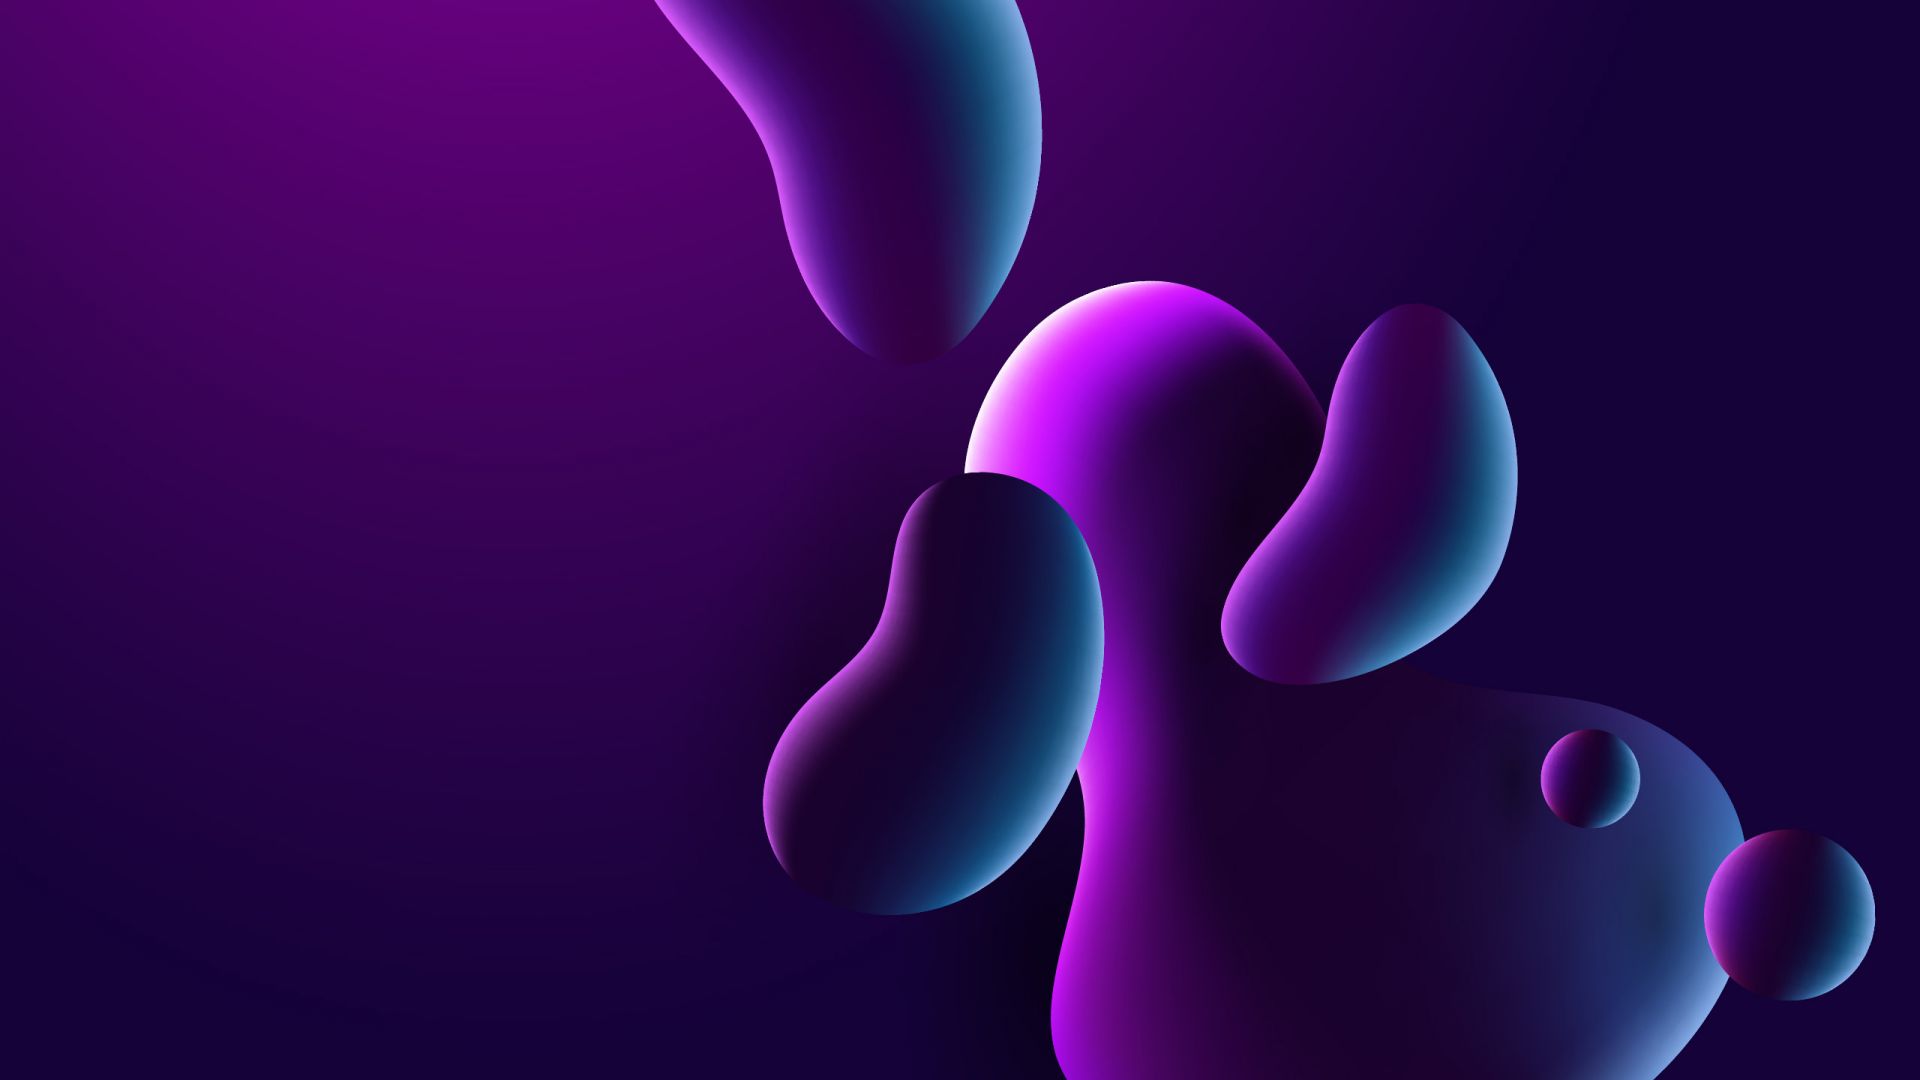 Wallpaper OnePlus 7T Pro, abstract, 4K, OS #22187